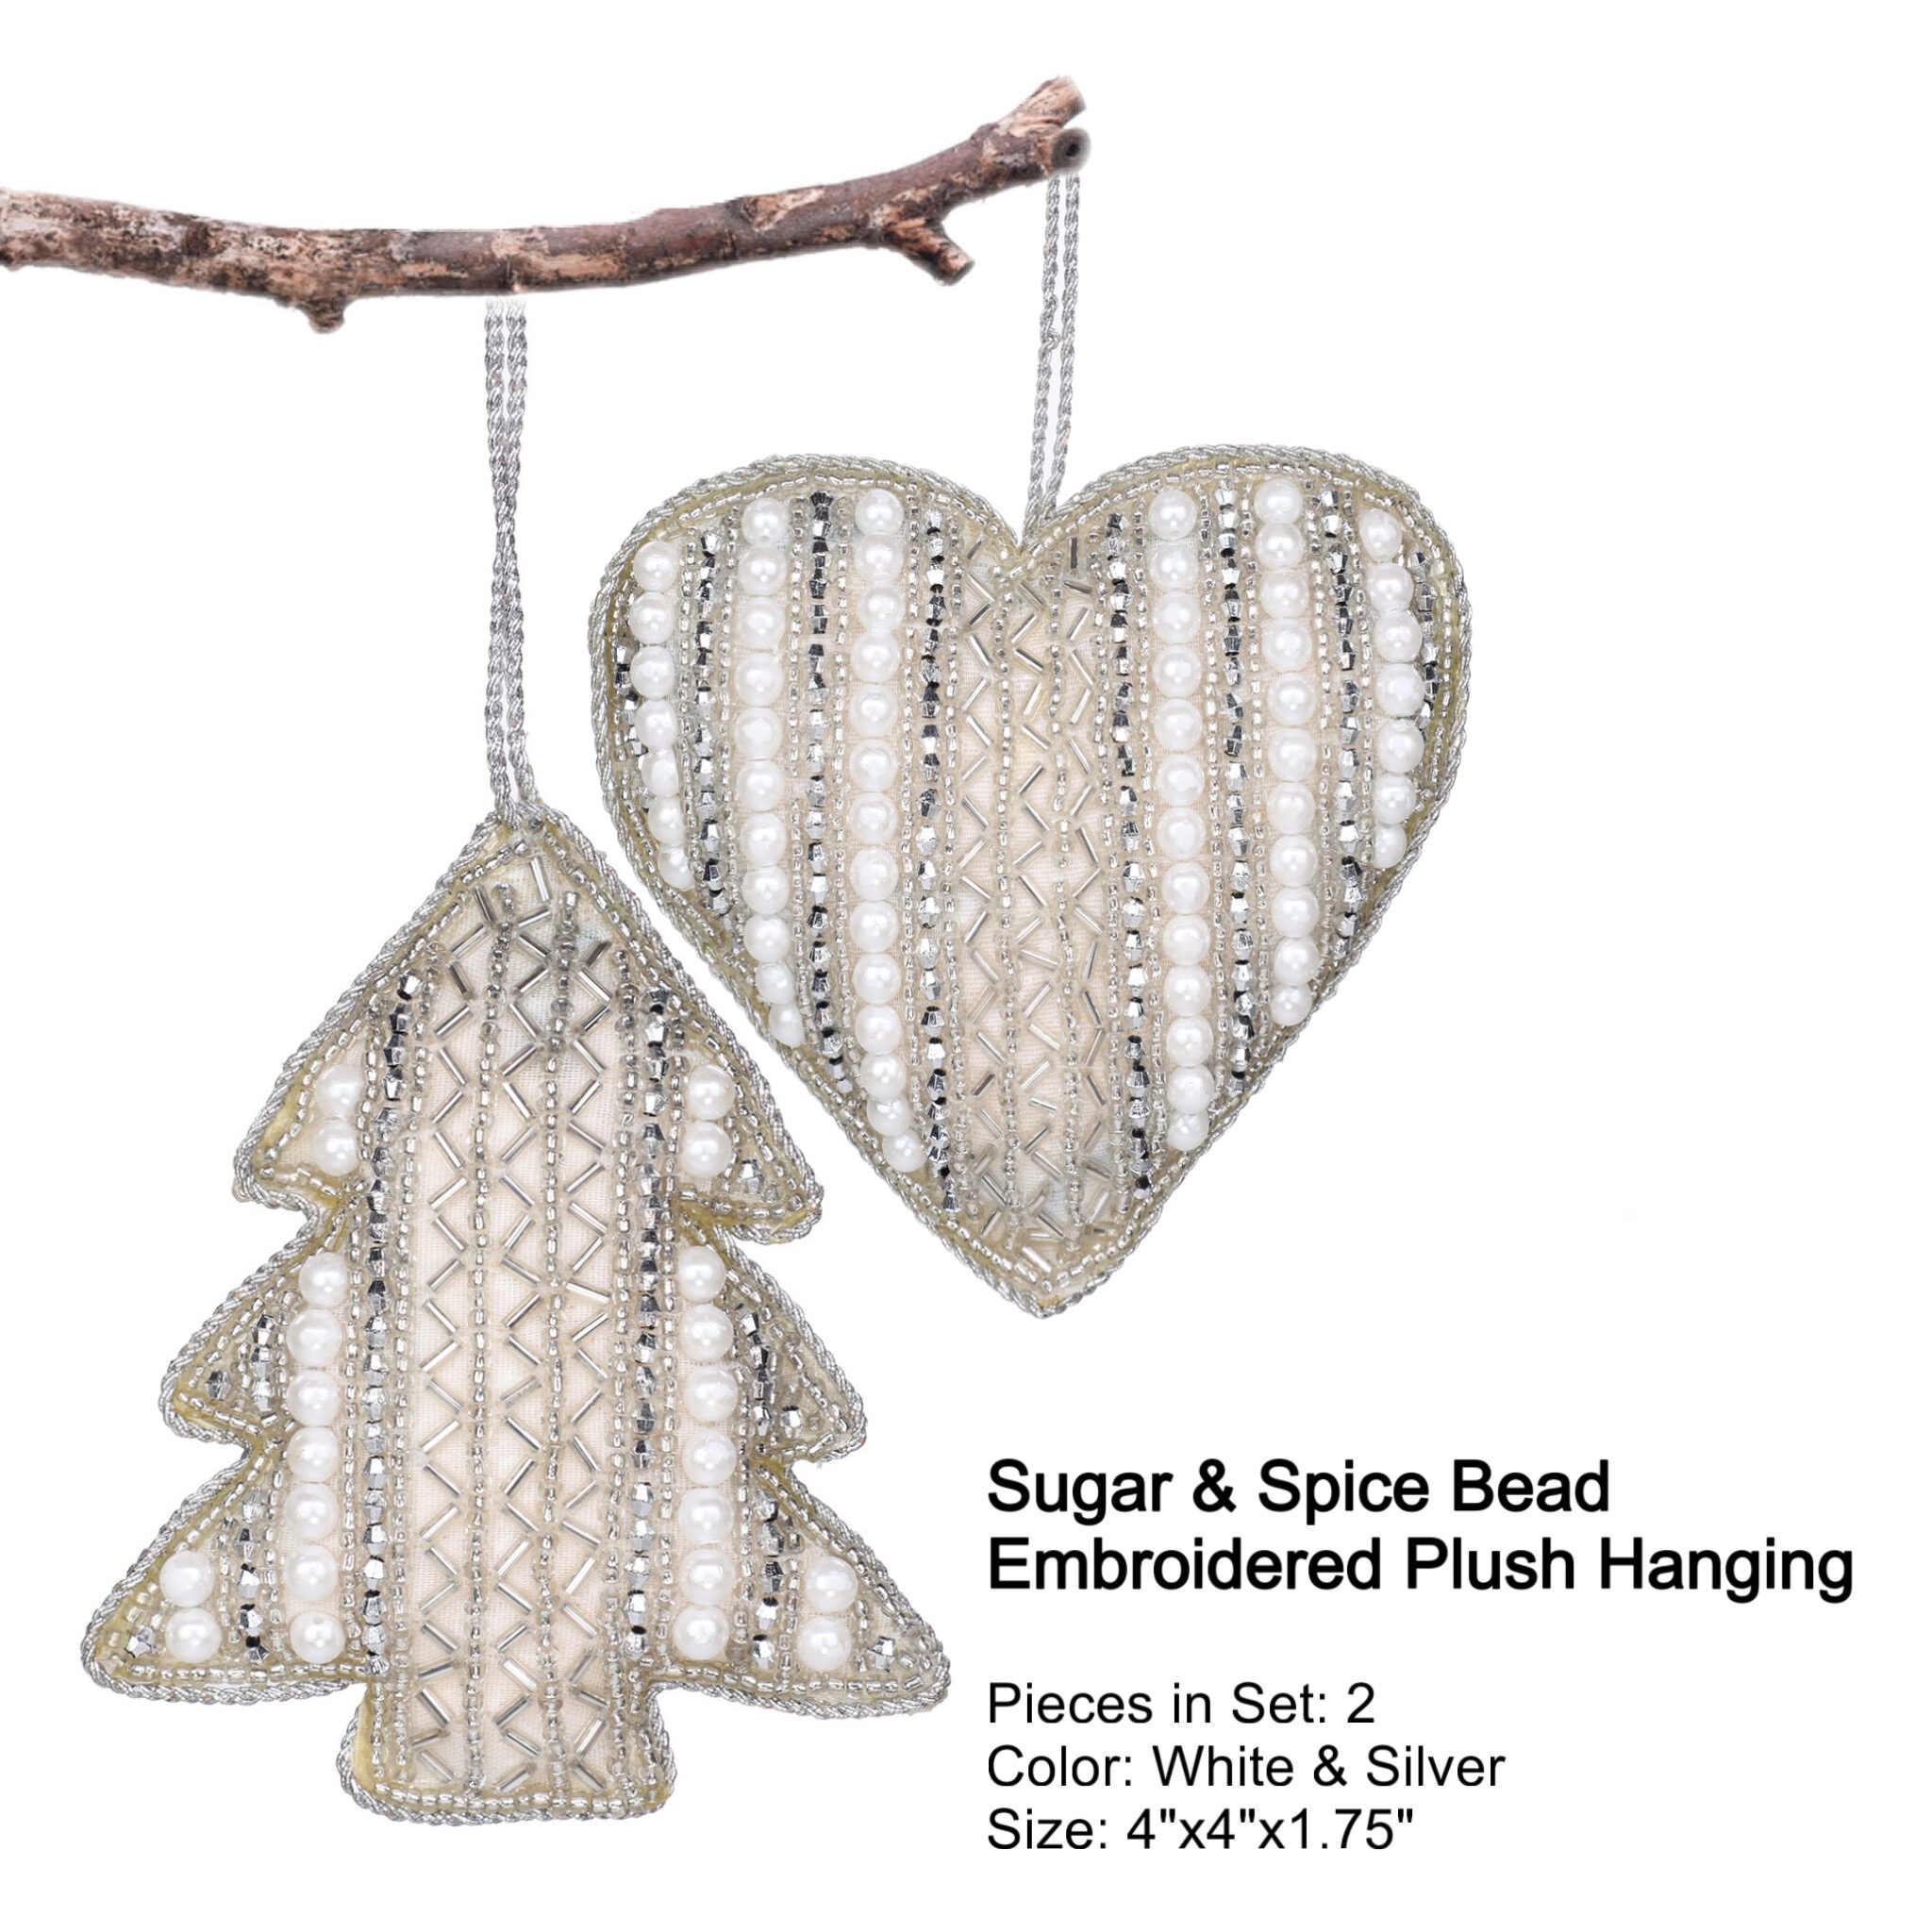 Sugar & Spice Bead Embroidered Plush Hanging in White & Silver, Set of 2